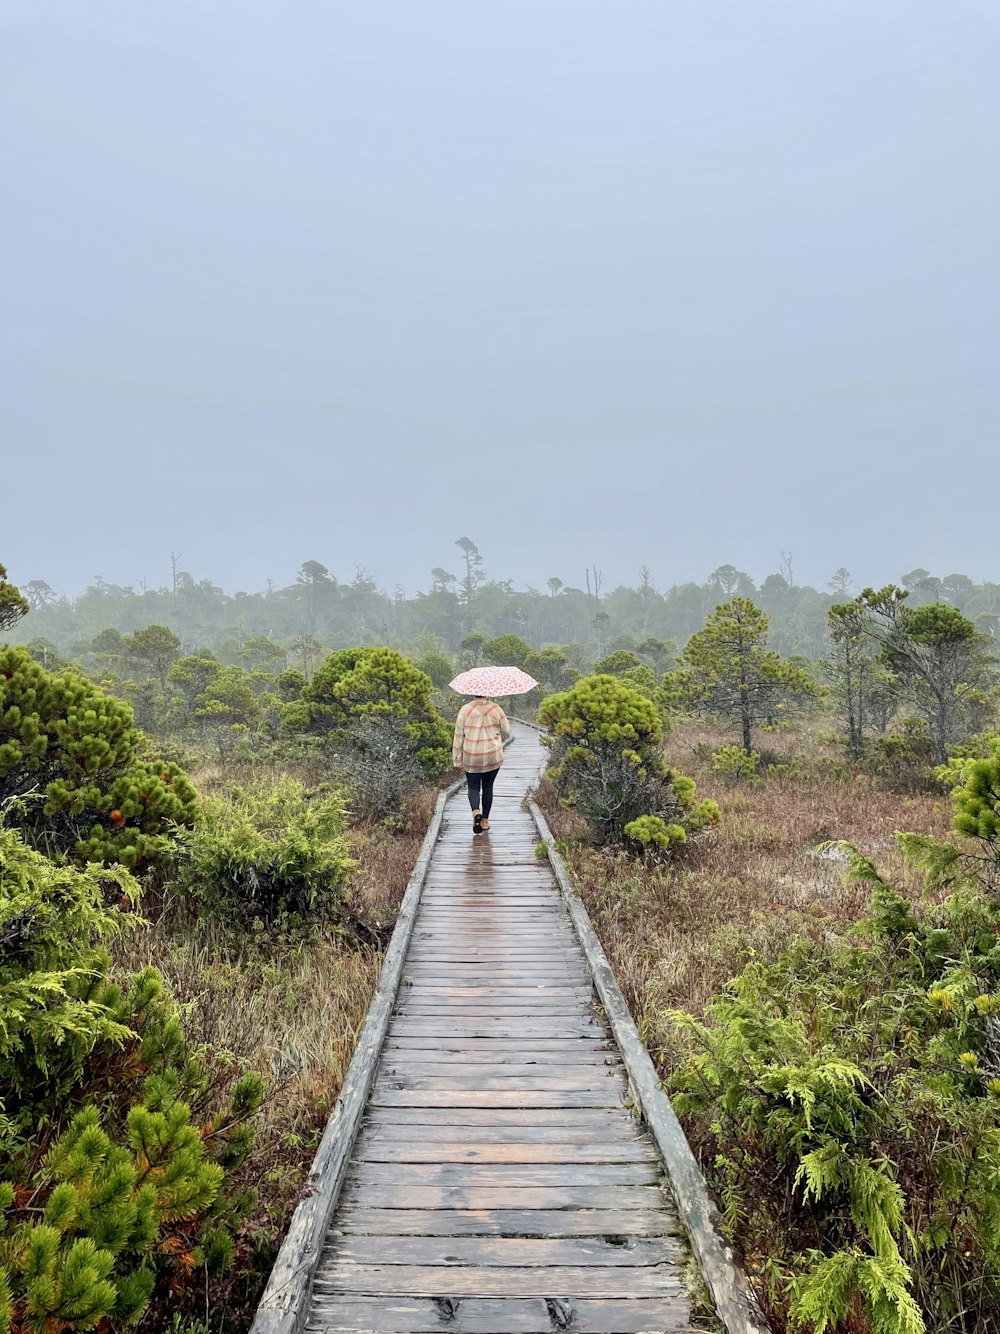 a person walking down a wooden walkway holding an umbrella